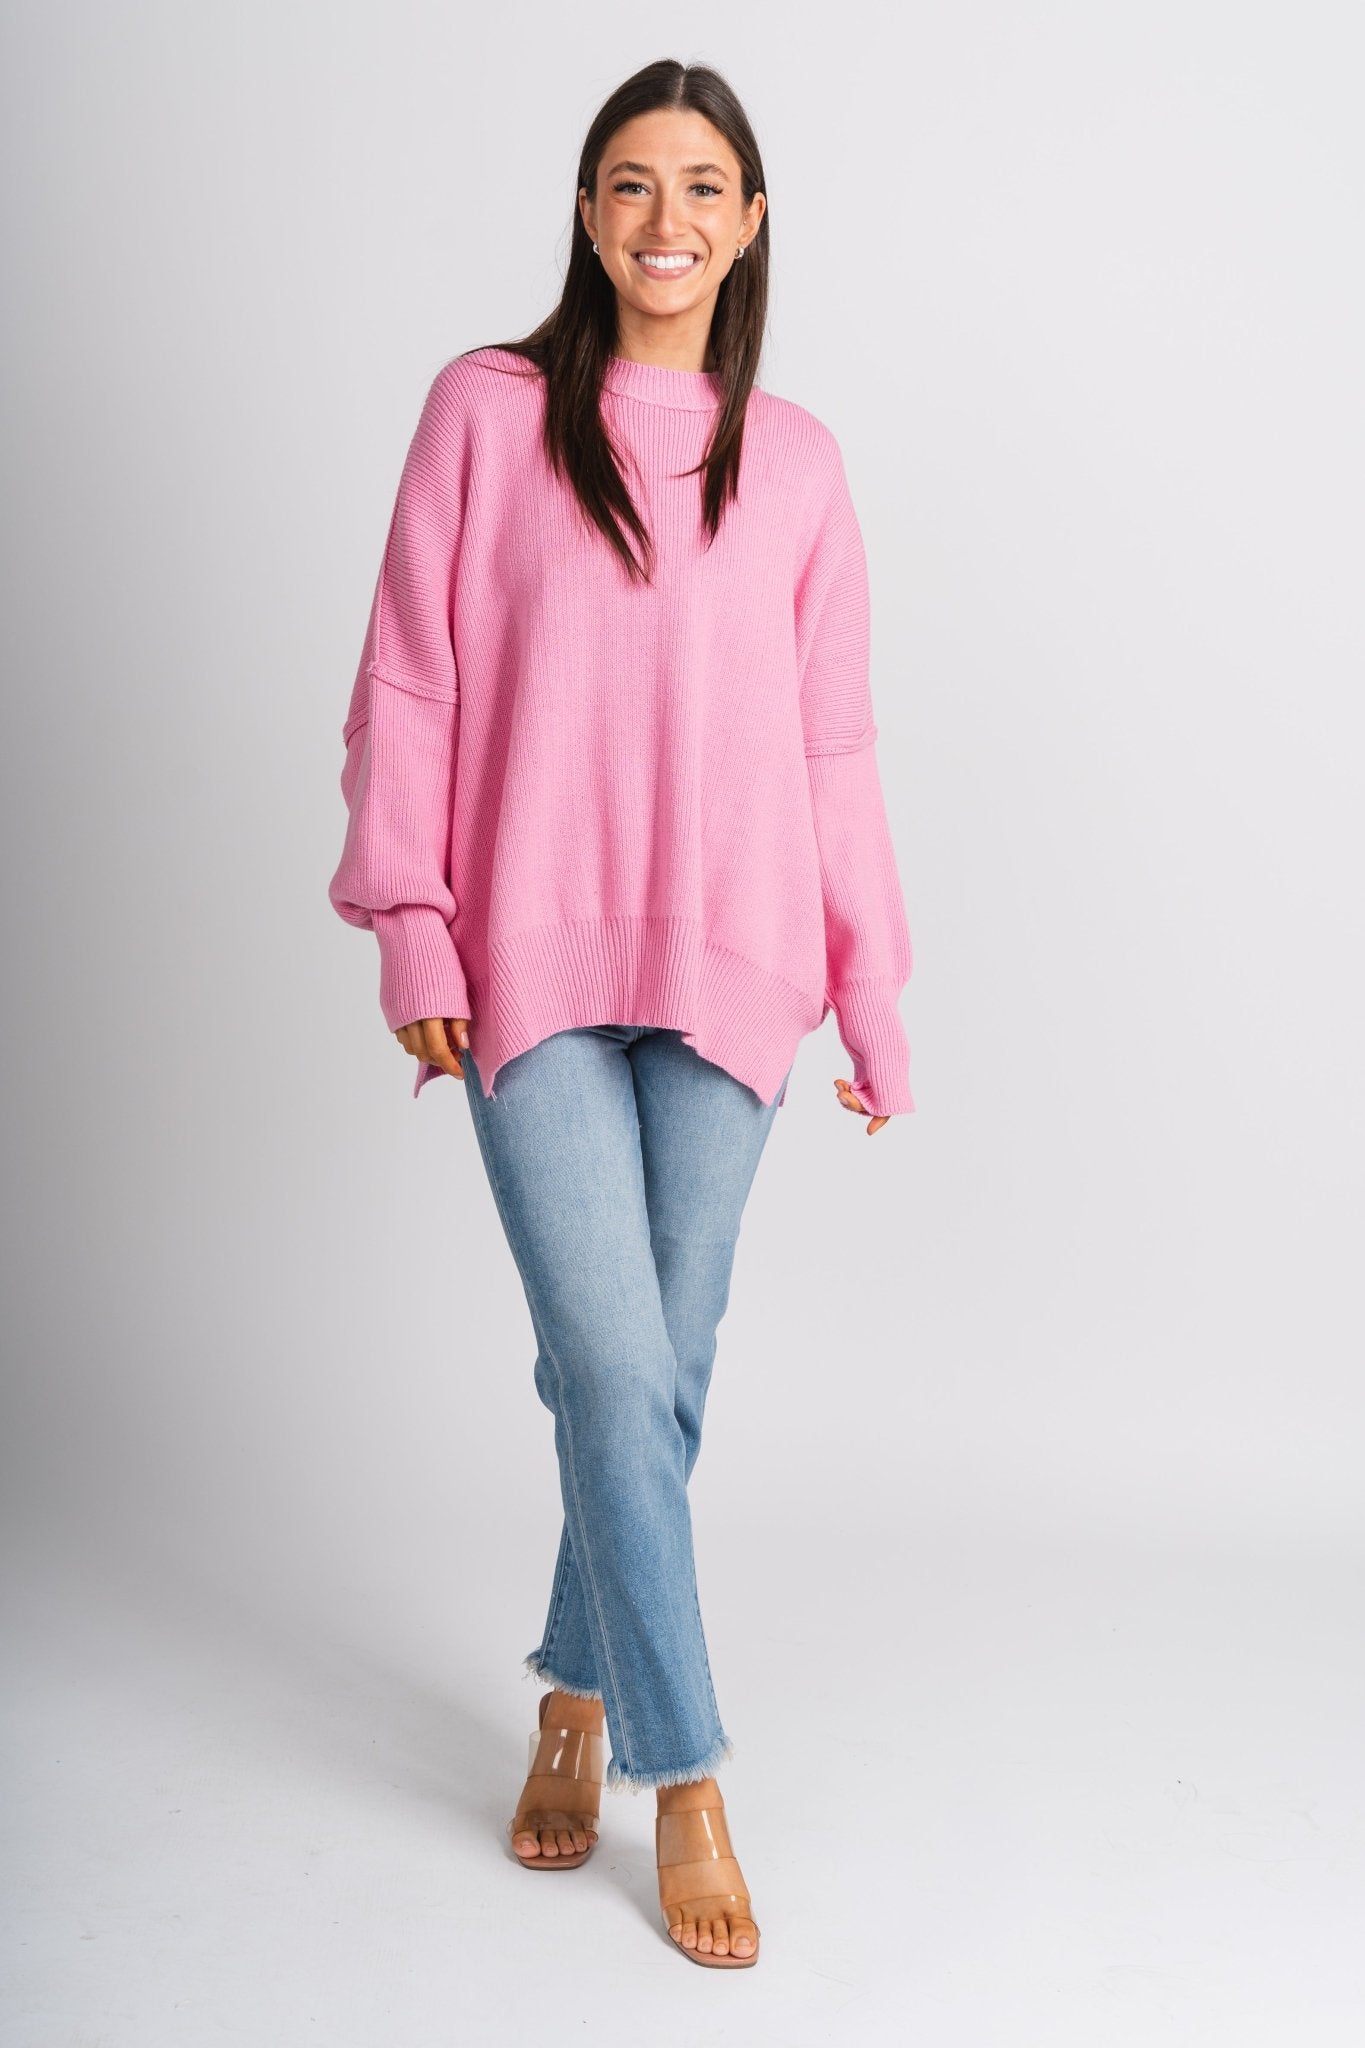 Oversized mock neck sweater pink - Cute Sweaters - Trendy Easter Clothing Line at Lush Fashion Lounge Boutique in Oklahoma